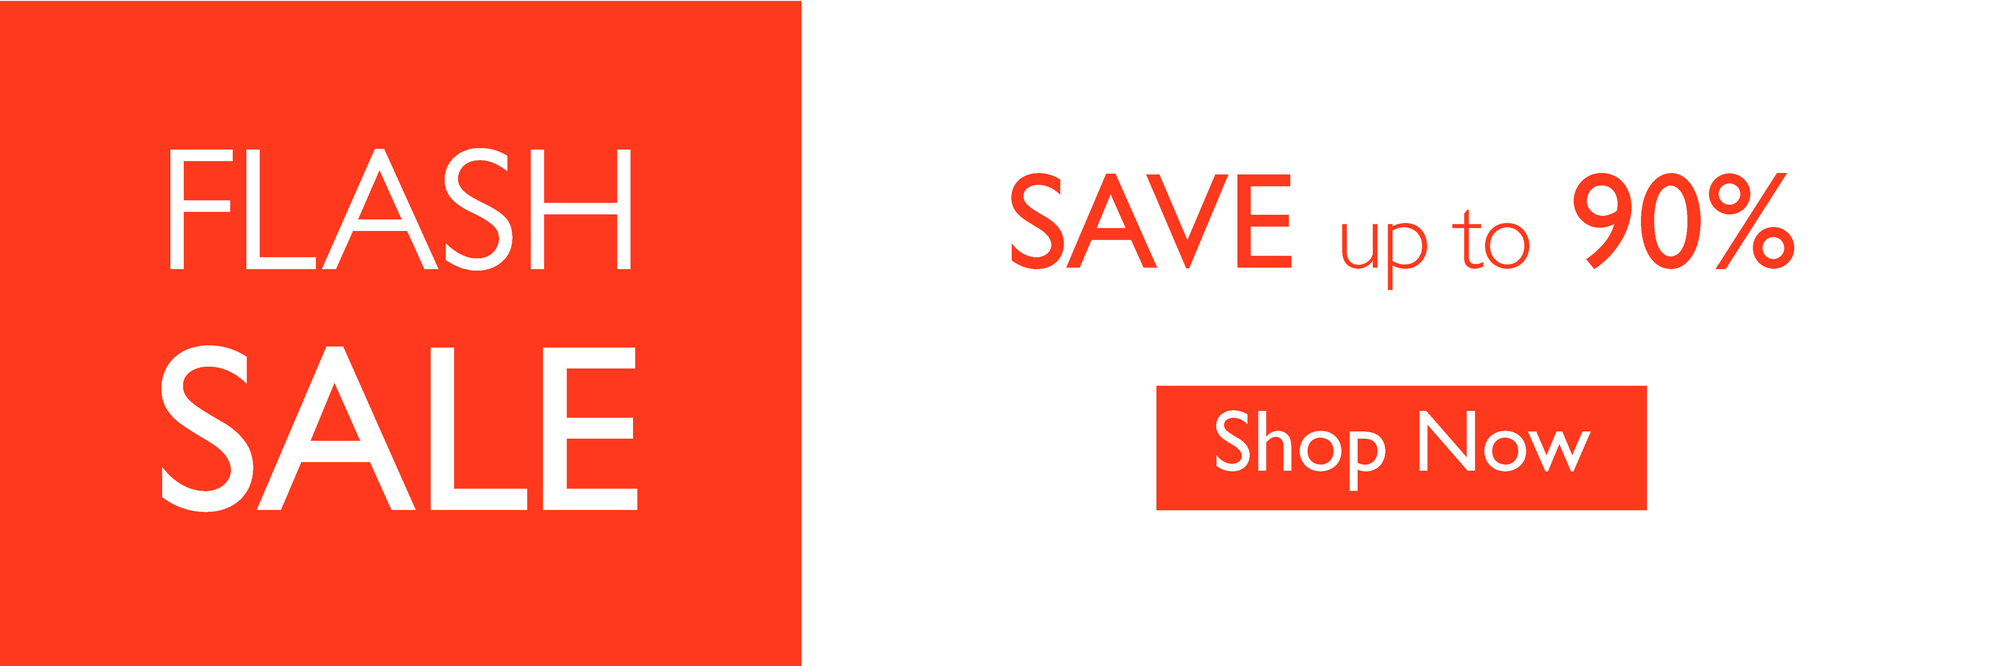 Flash Sale Save up to 90%